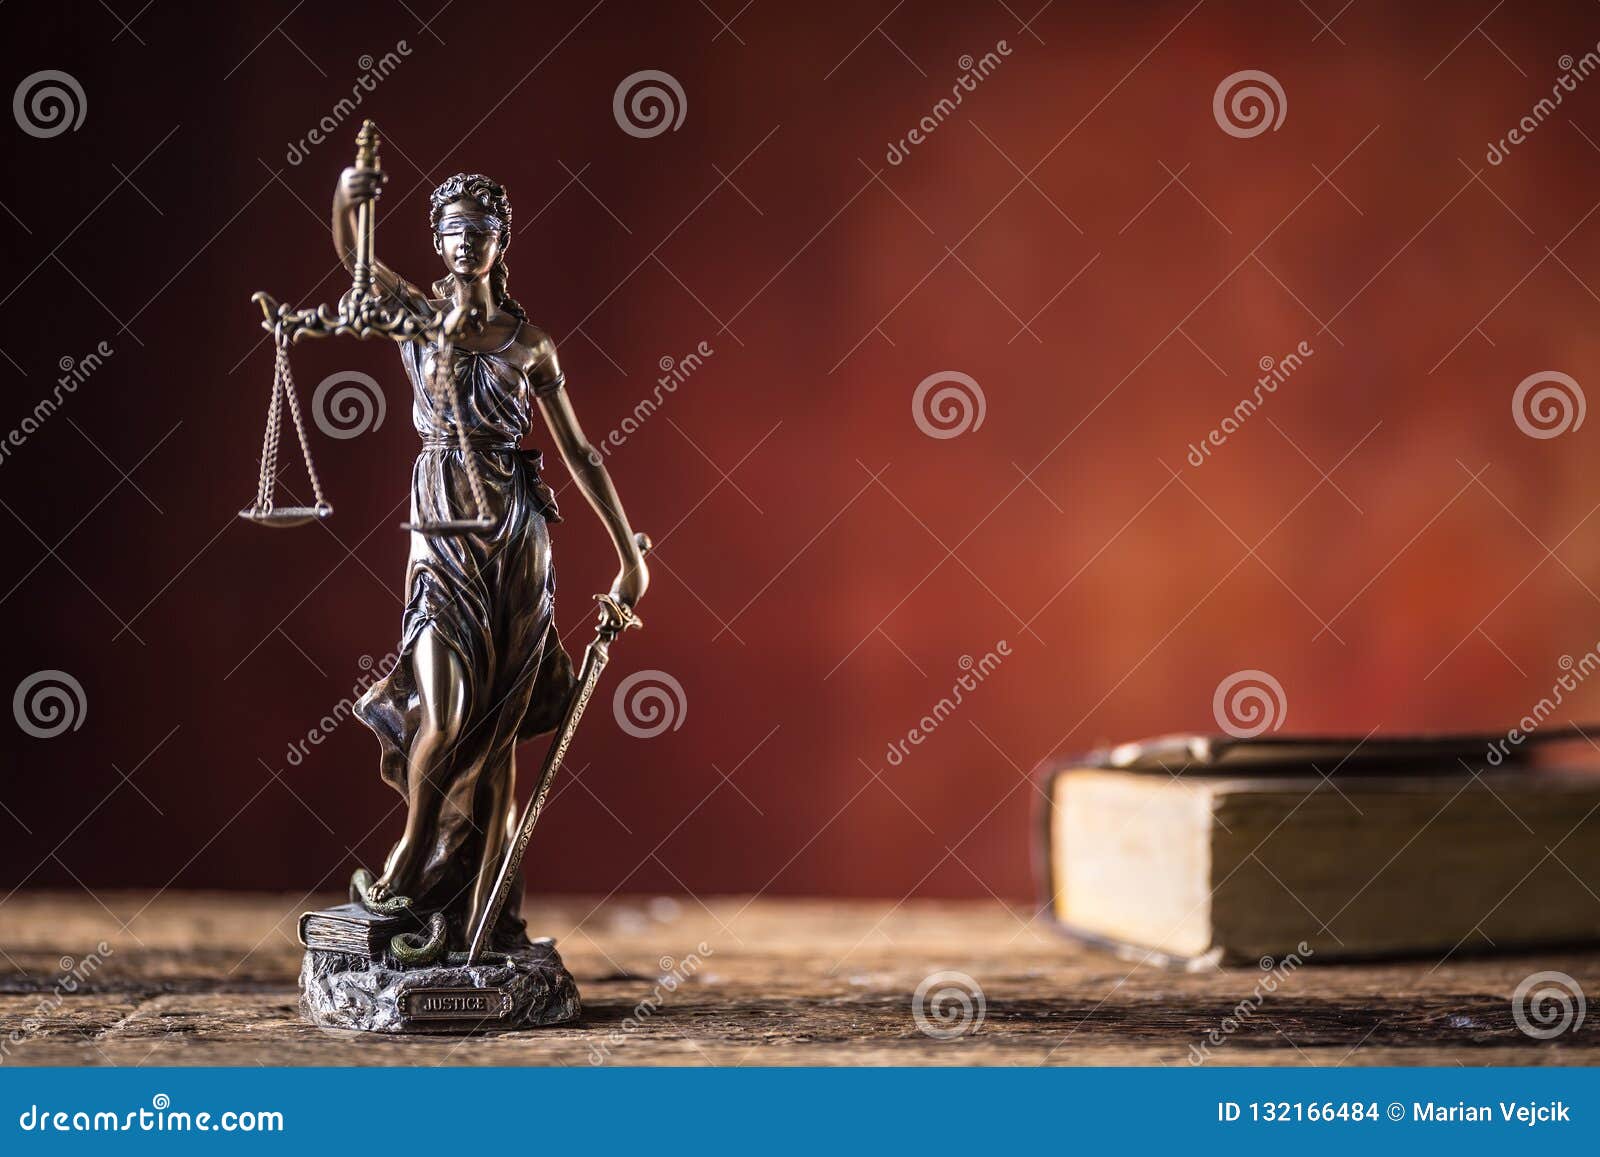 lady justicia holding sword and scale bronze figurine with book